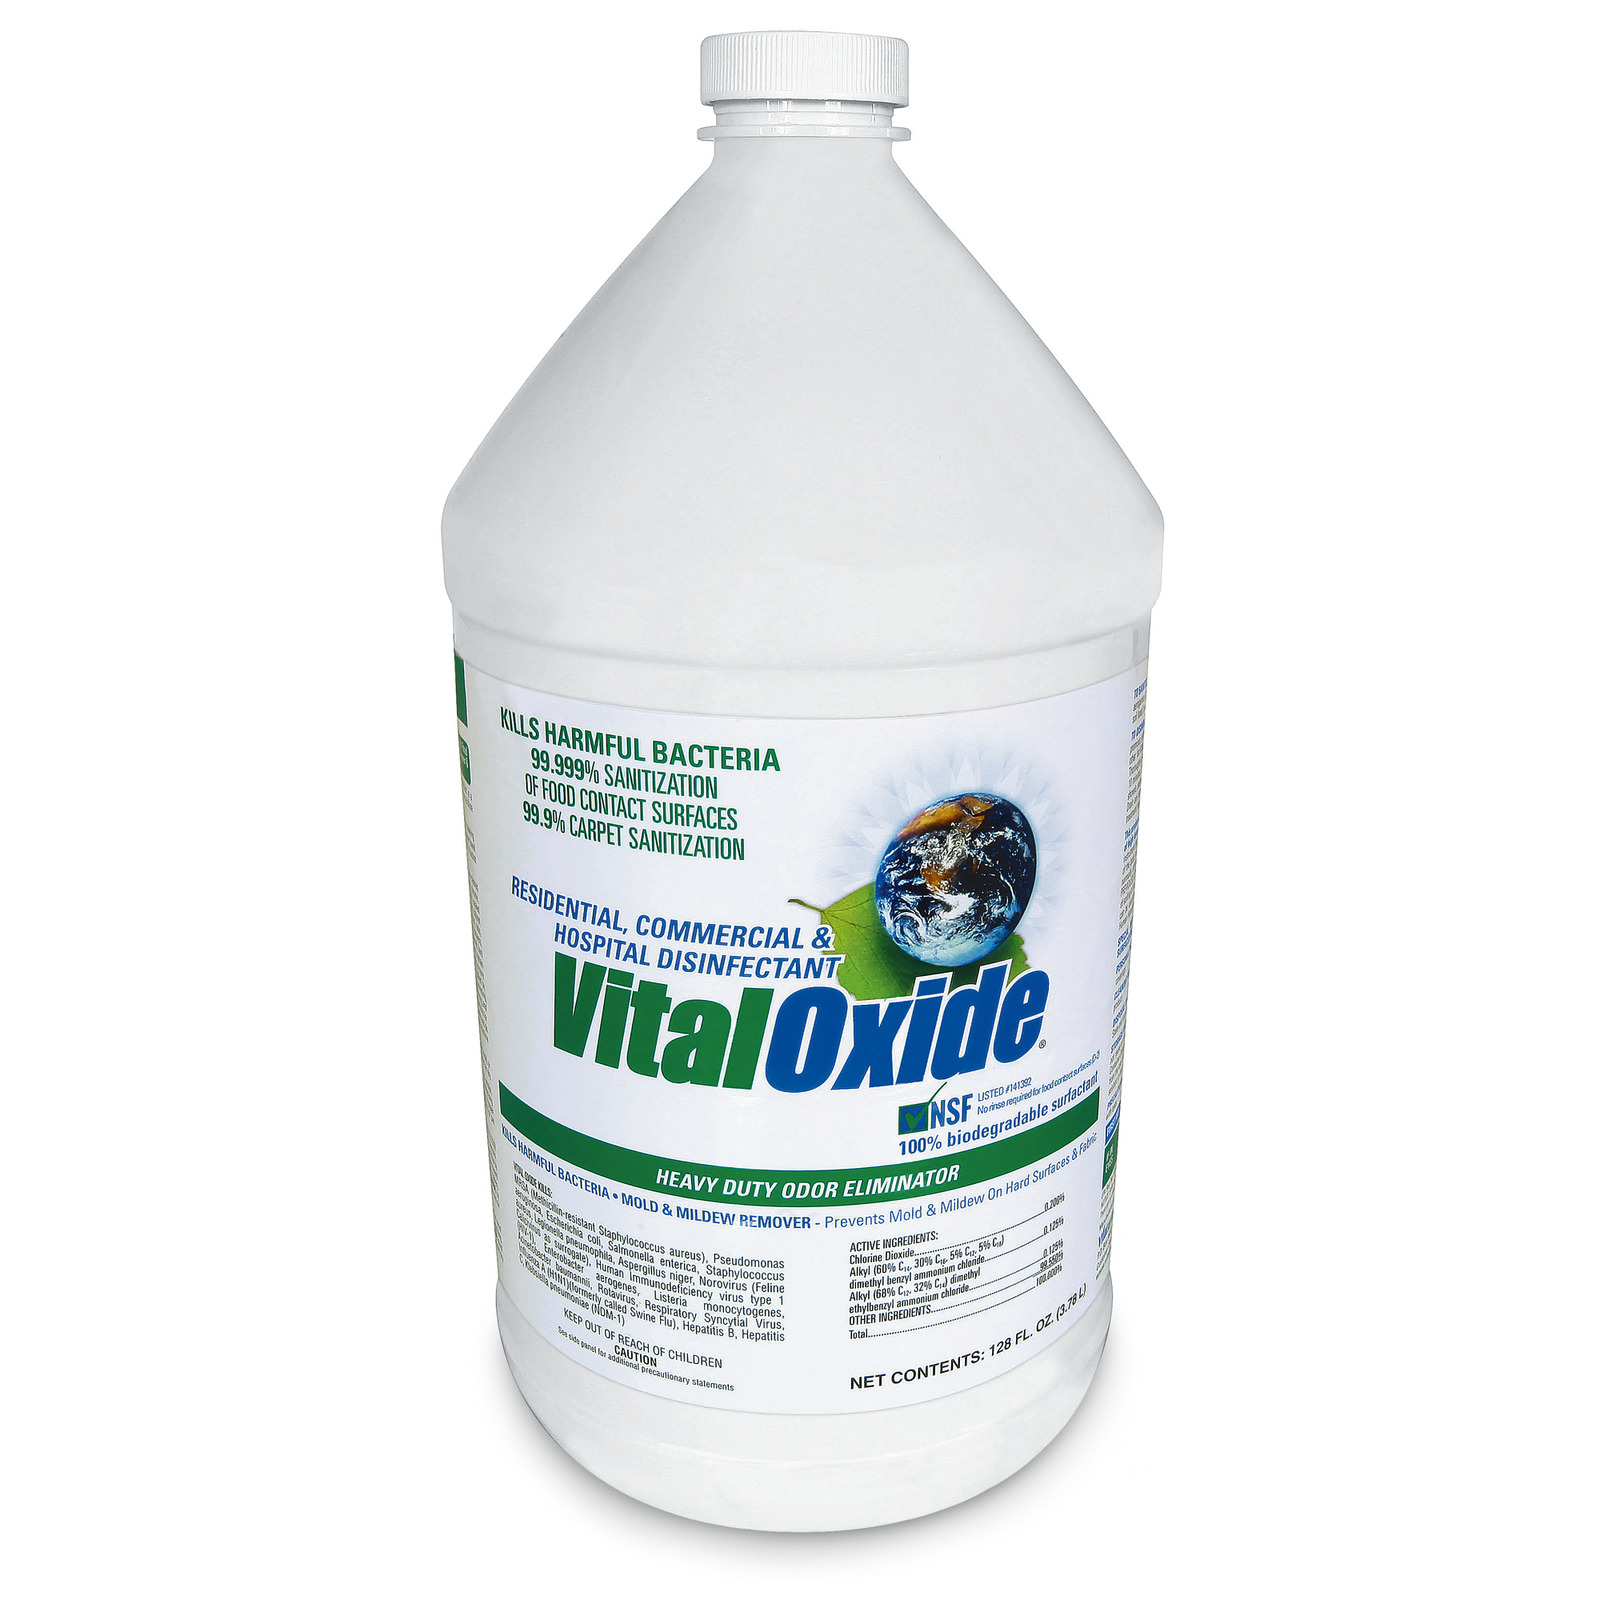 Vital Oxide Disinfectant Cleaner & Mold Remover